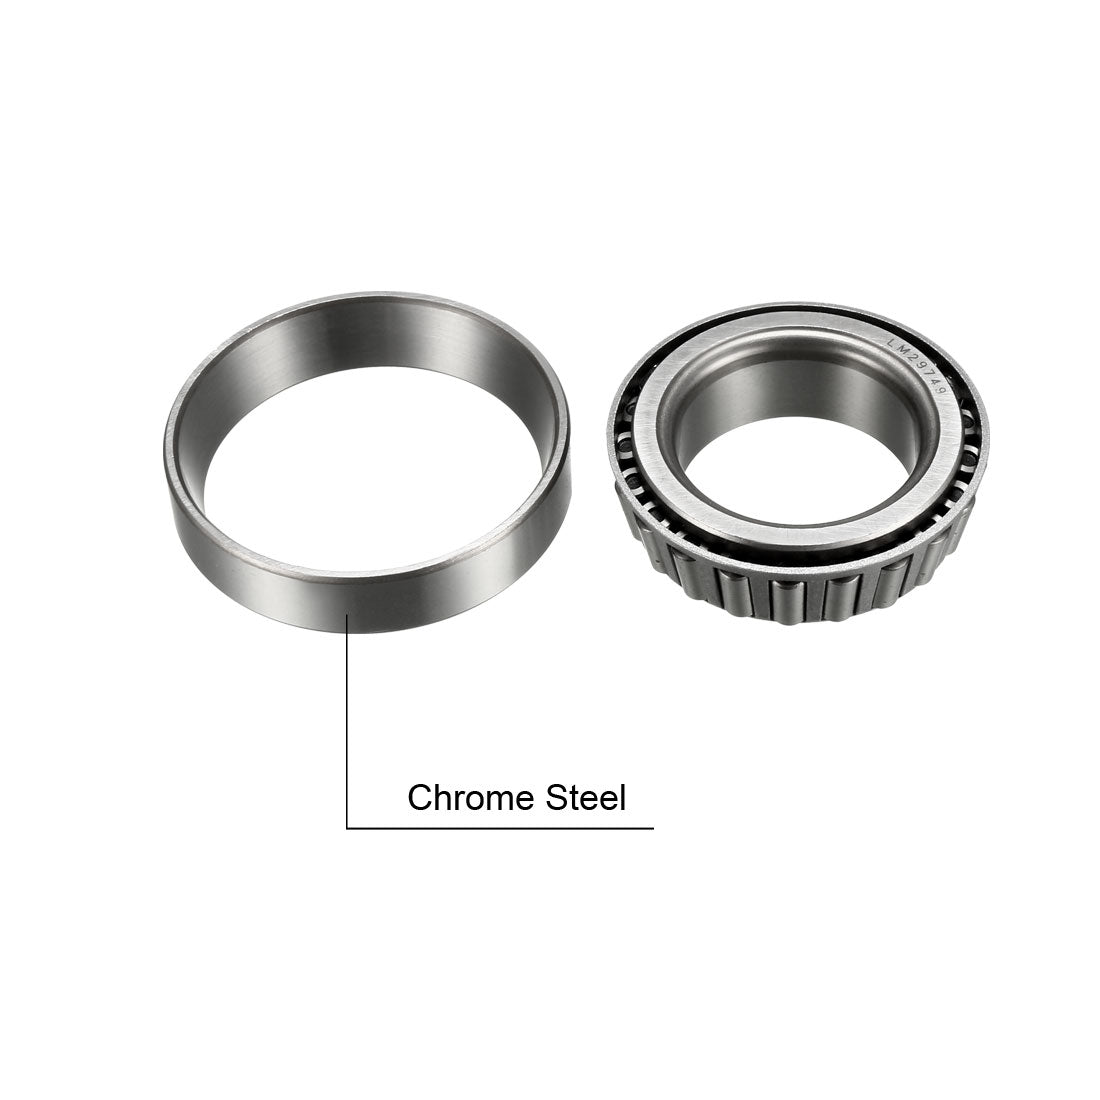 uxcell Uxcell LM29749/LM29710 Tapered Roller Bearing Cone and Cup Set 1.5" Bore 2.5625" O.D.